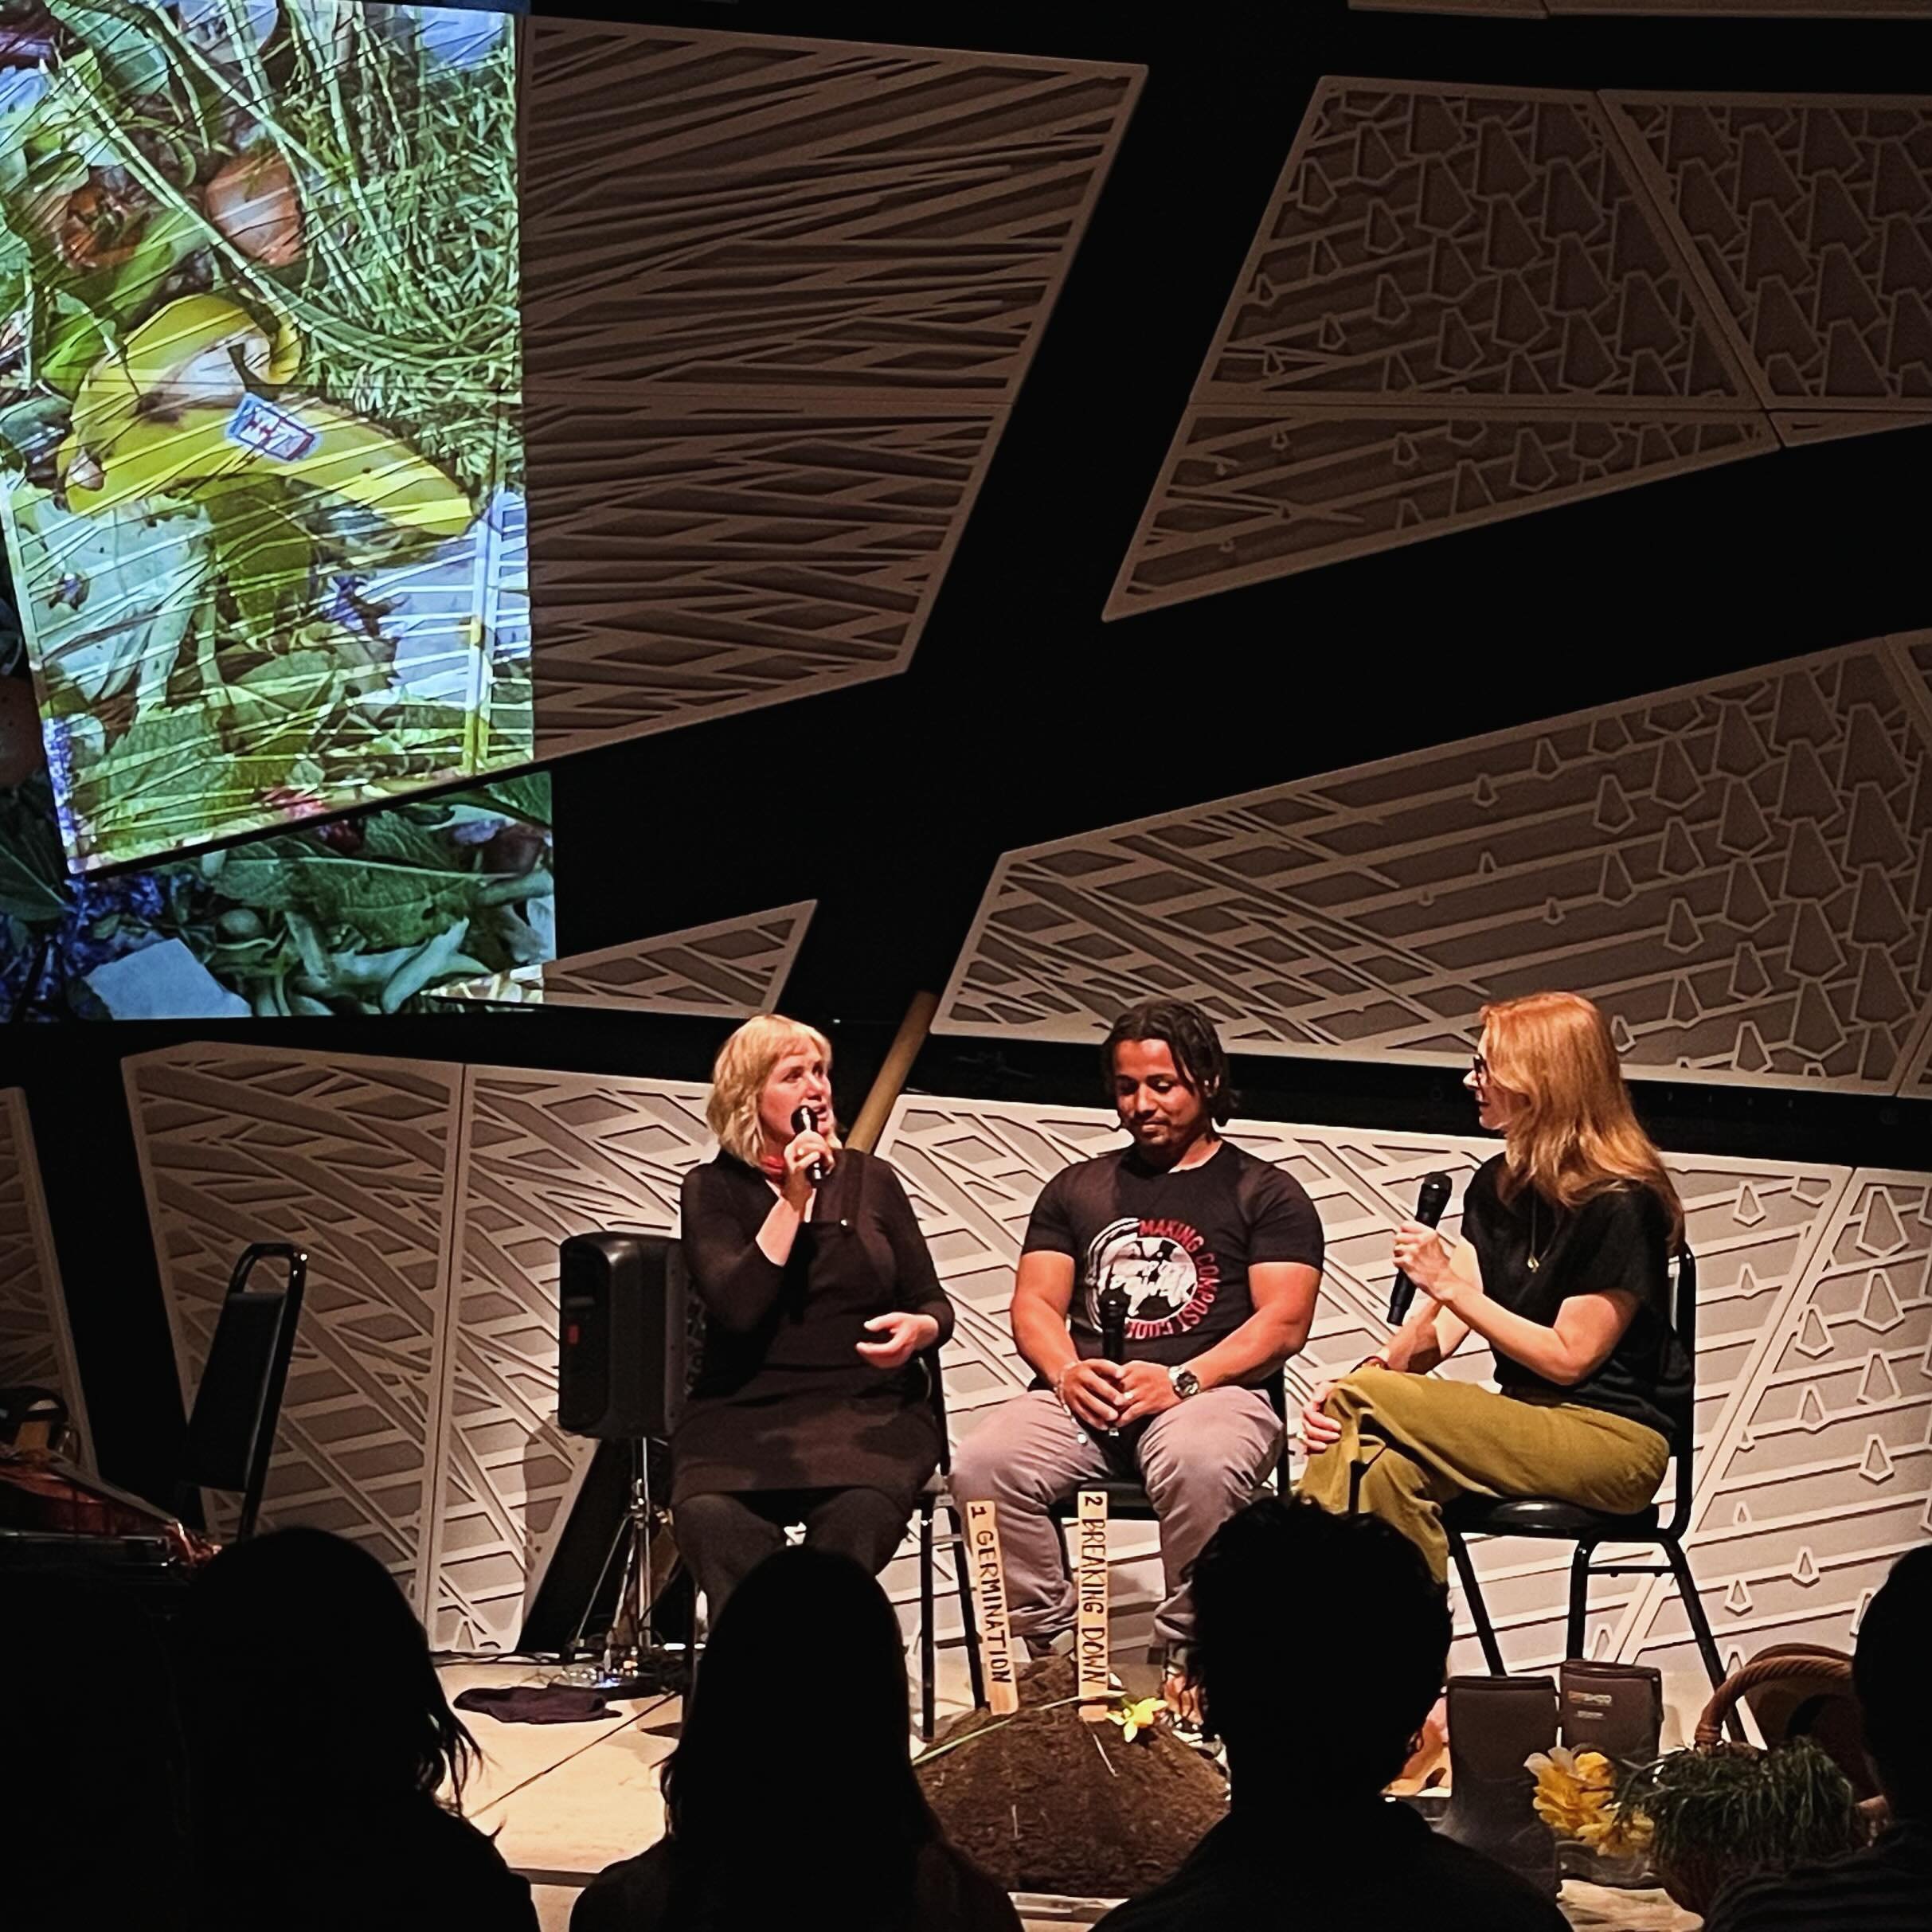 Panel discussion with Tannis, Domingo @compostpower and Melissa @clarkbar at a NS+ Compost! presentation @nationalsawdust 📷 by @elenalumahai